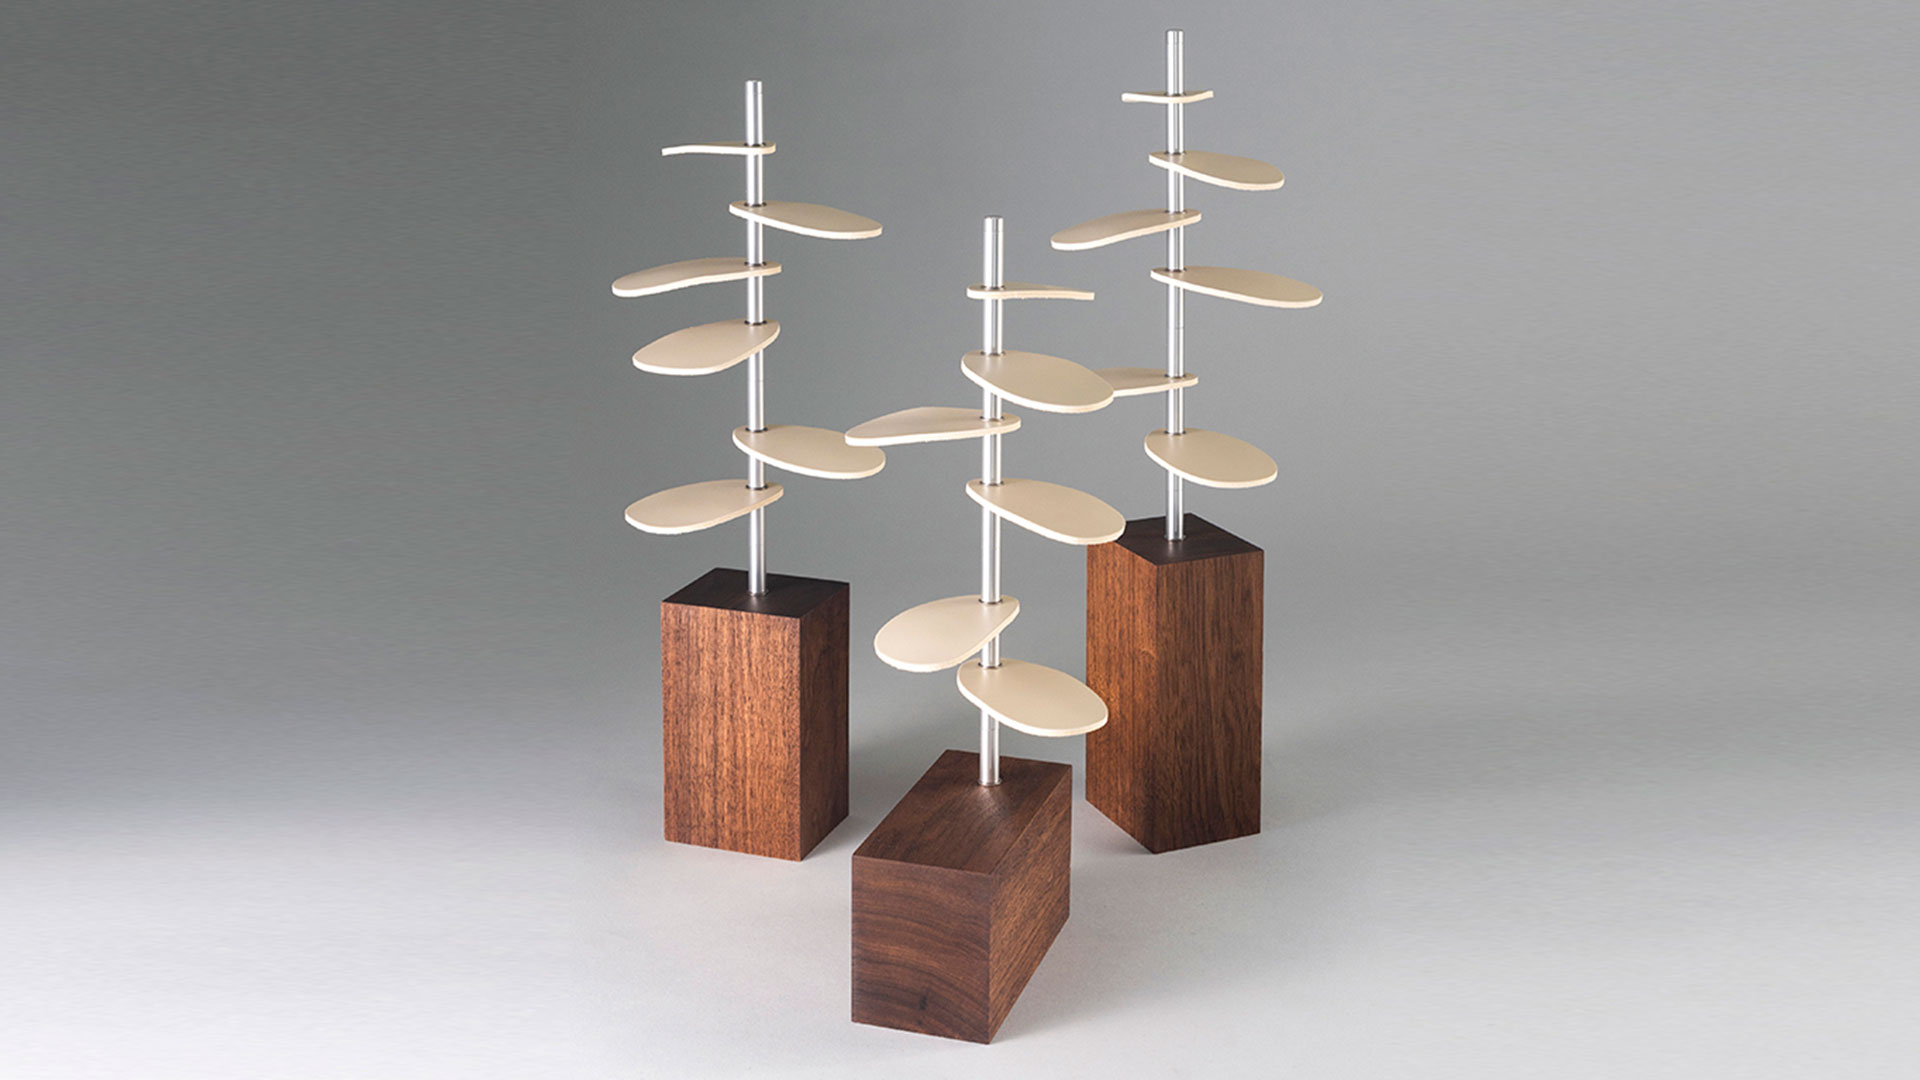 trio of tree-shaped design pieces with wood bases, metal stems, and white leather leaves.